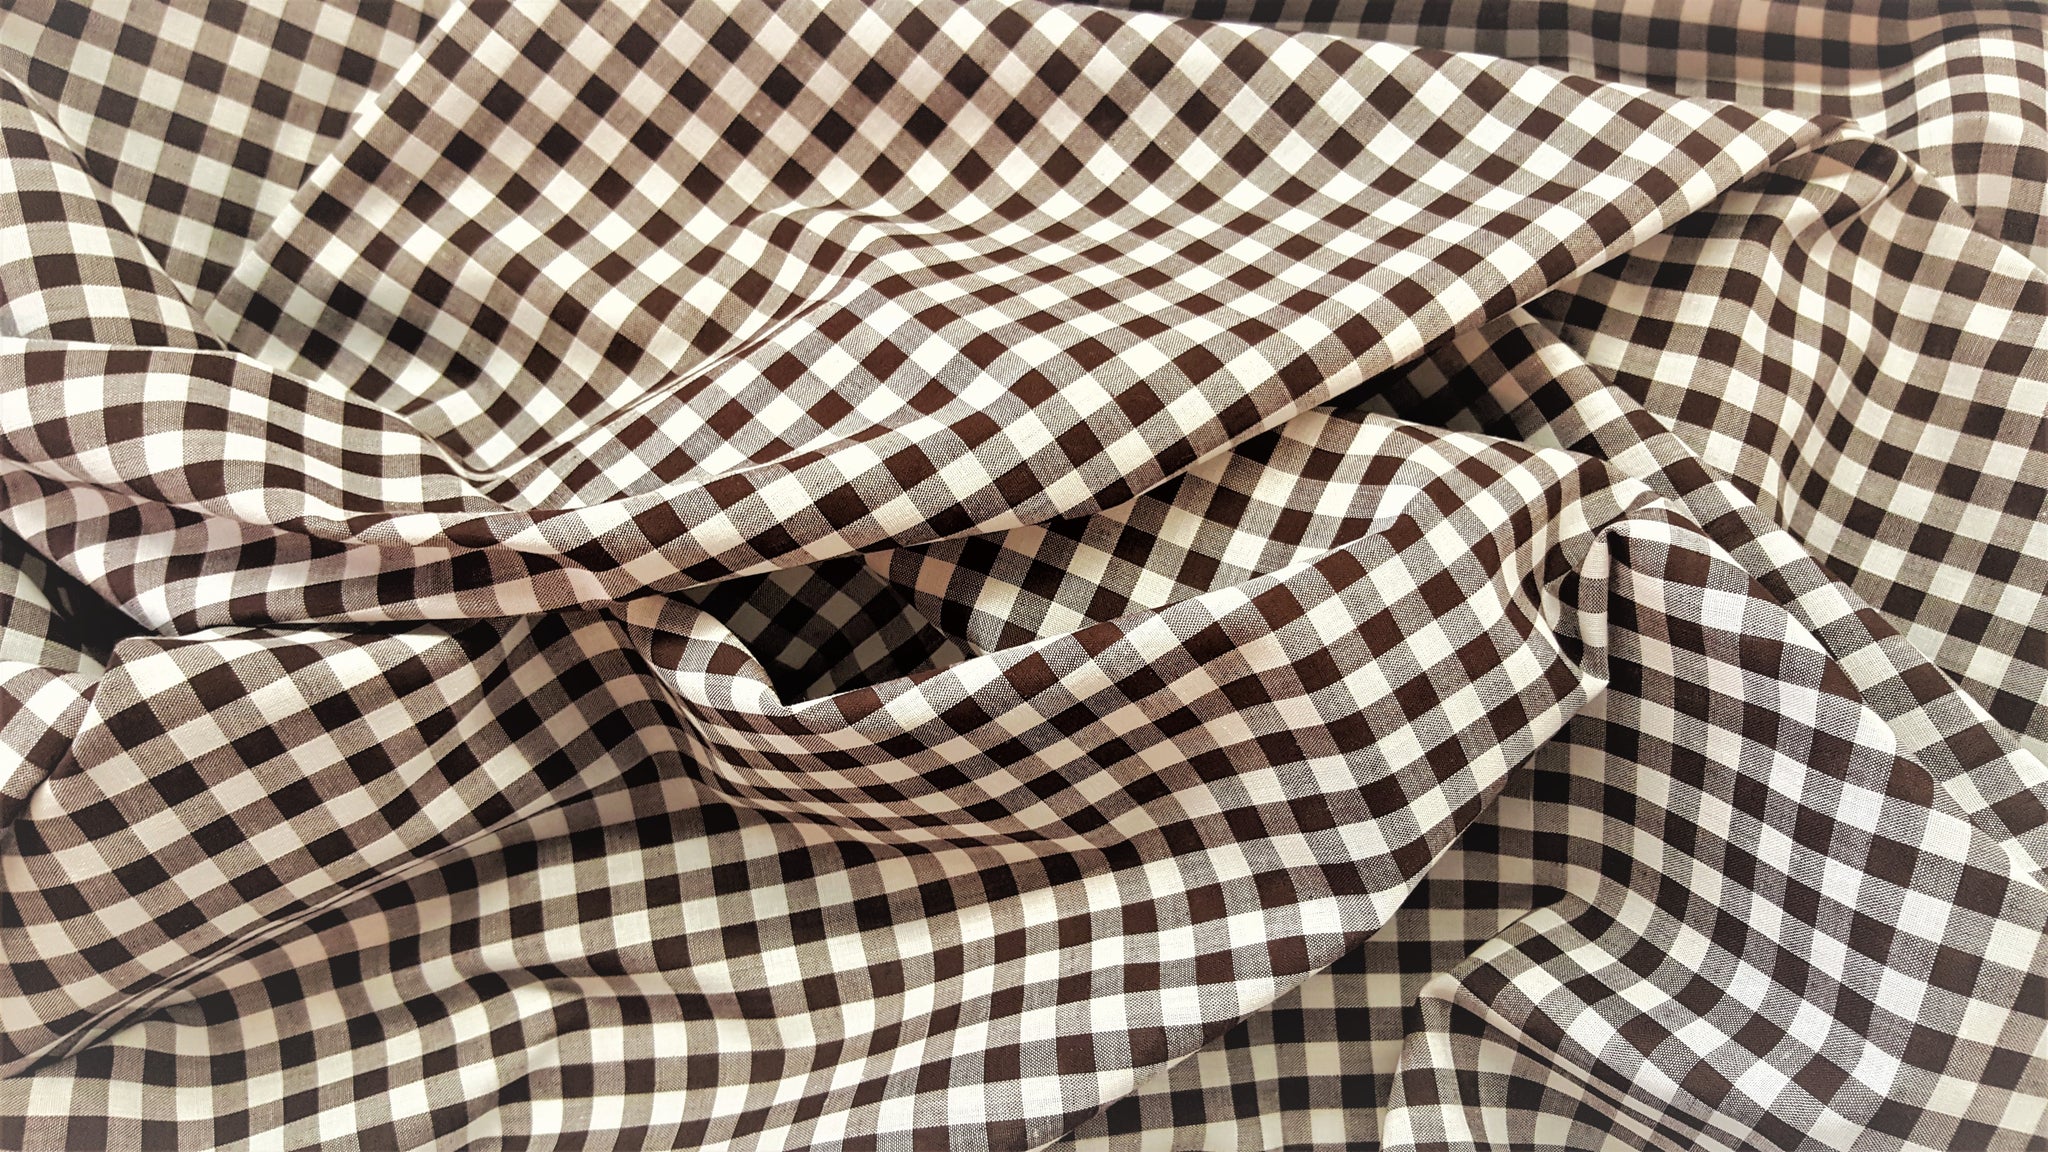 Gingham Fabric, The Cotton Gingham Fabric Collection